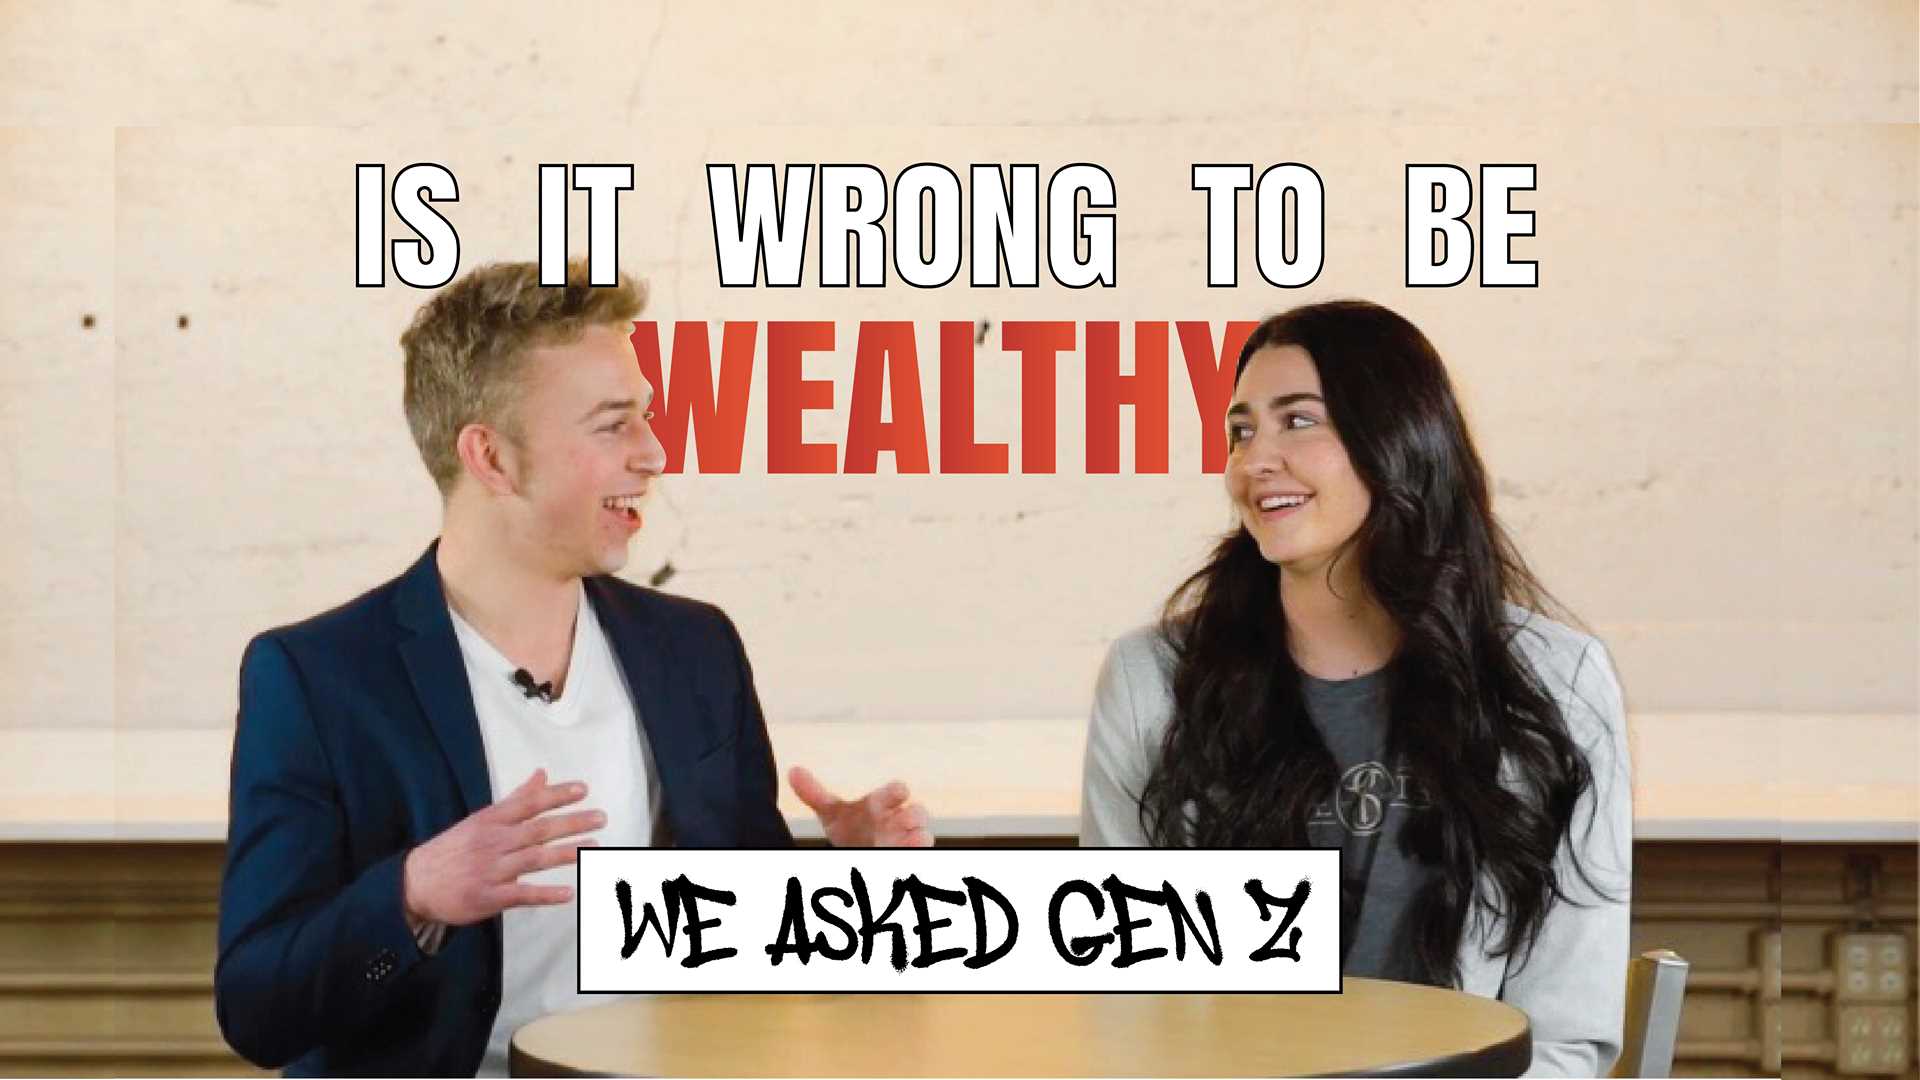 VIDEO: We Asked Gen Z: Is it Wrong to be Wealthy?